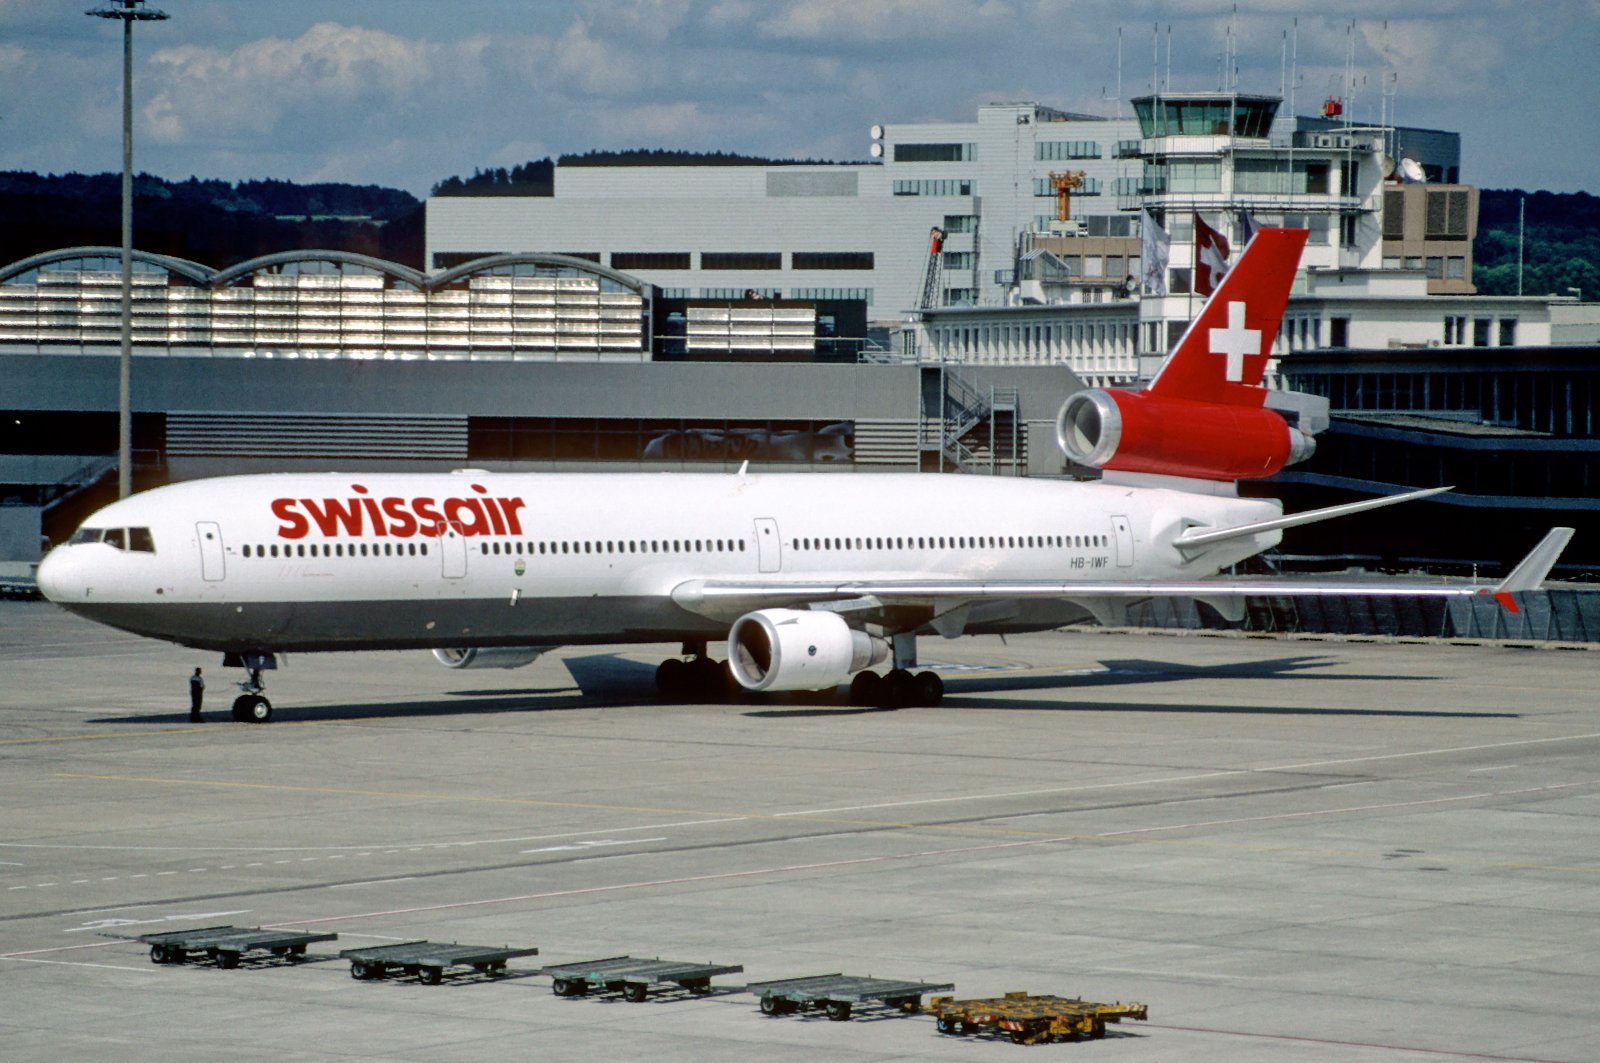 HB-IWF - the aircraft involved in Swiss Air Flight 111 accident, as seen at Zurich Airport in July 1998, just two months before the crash